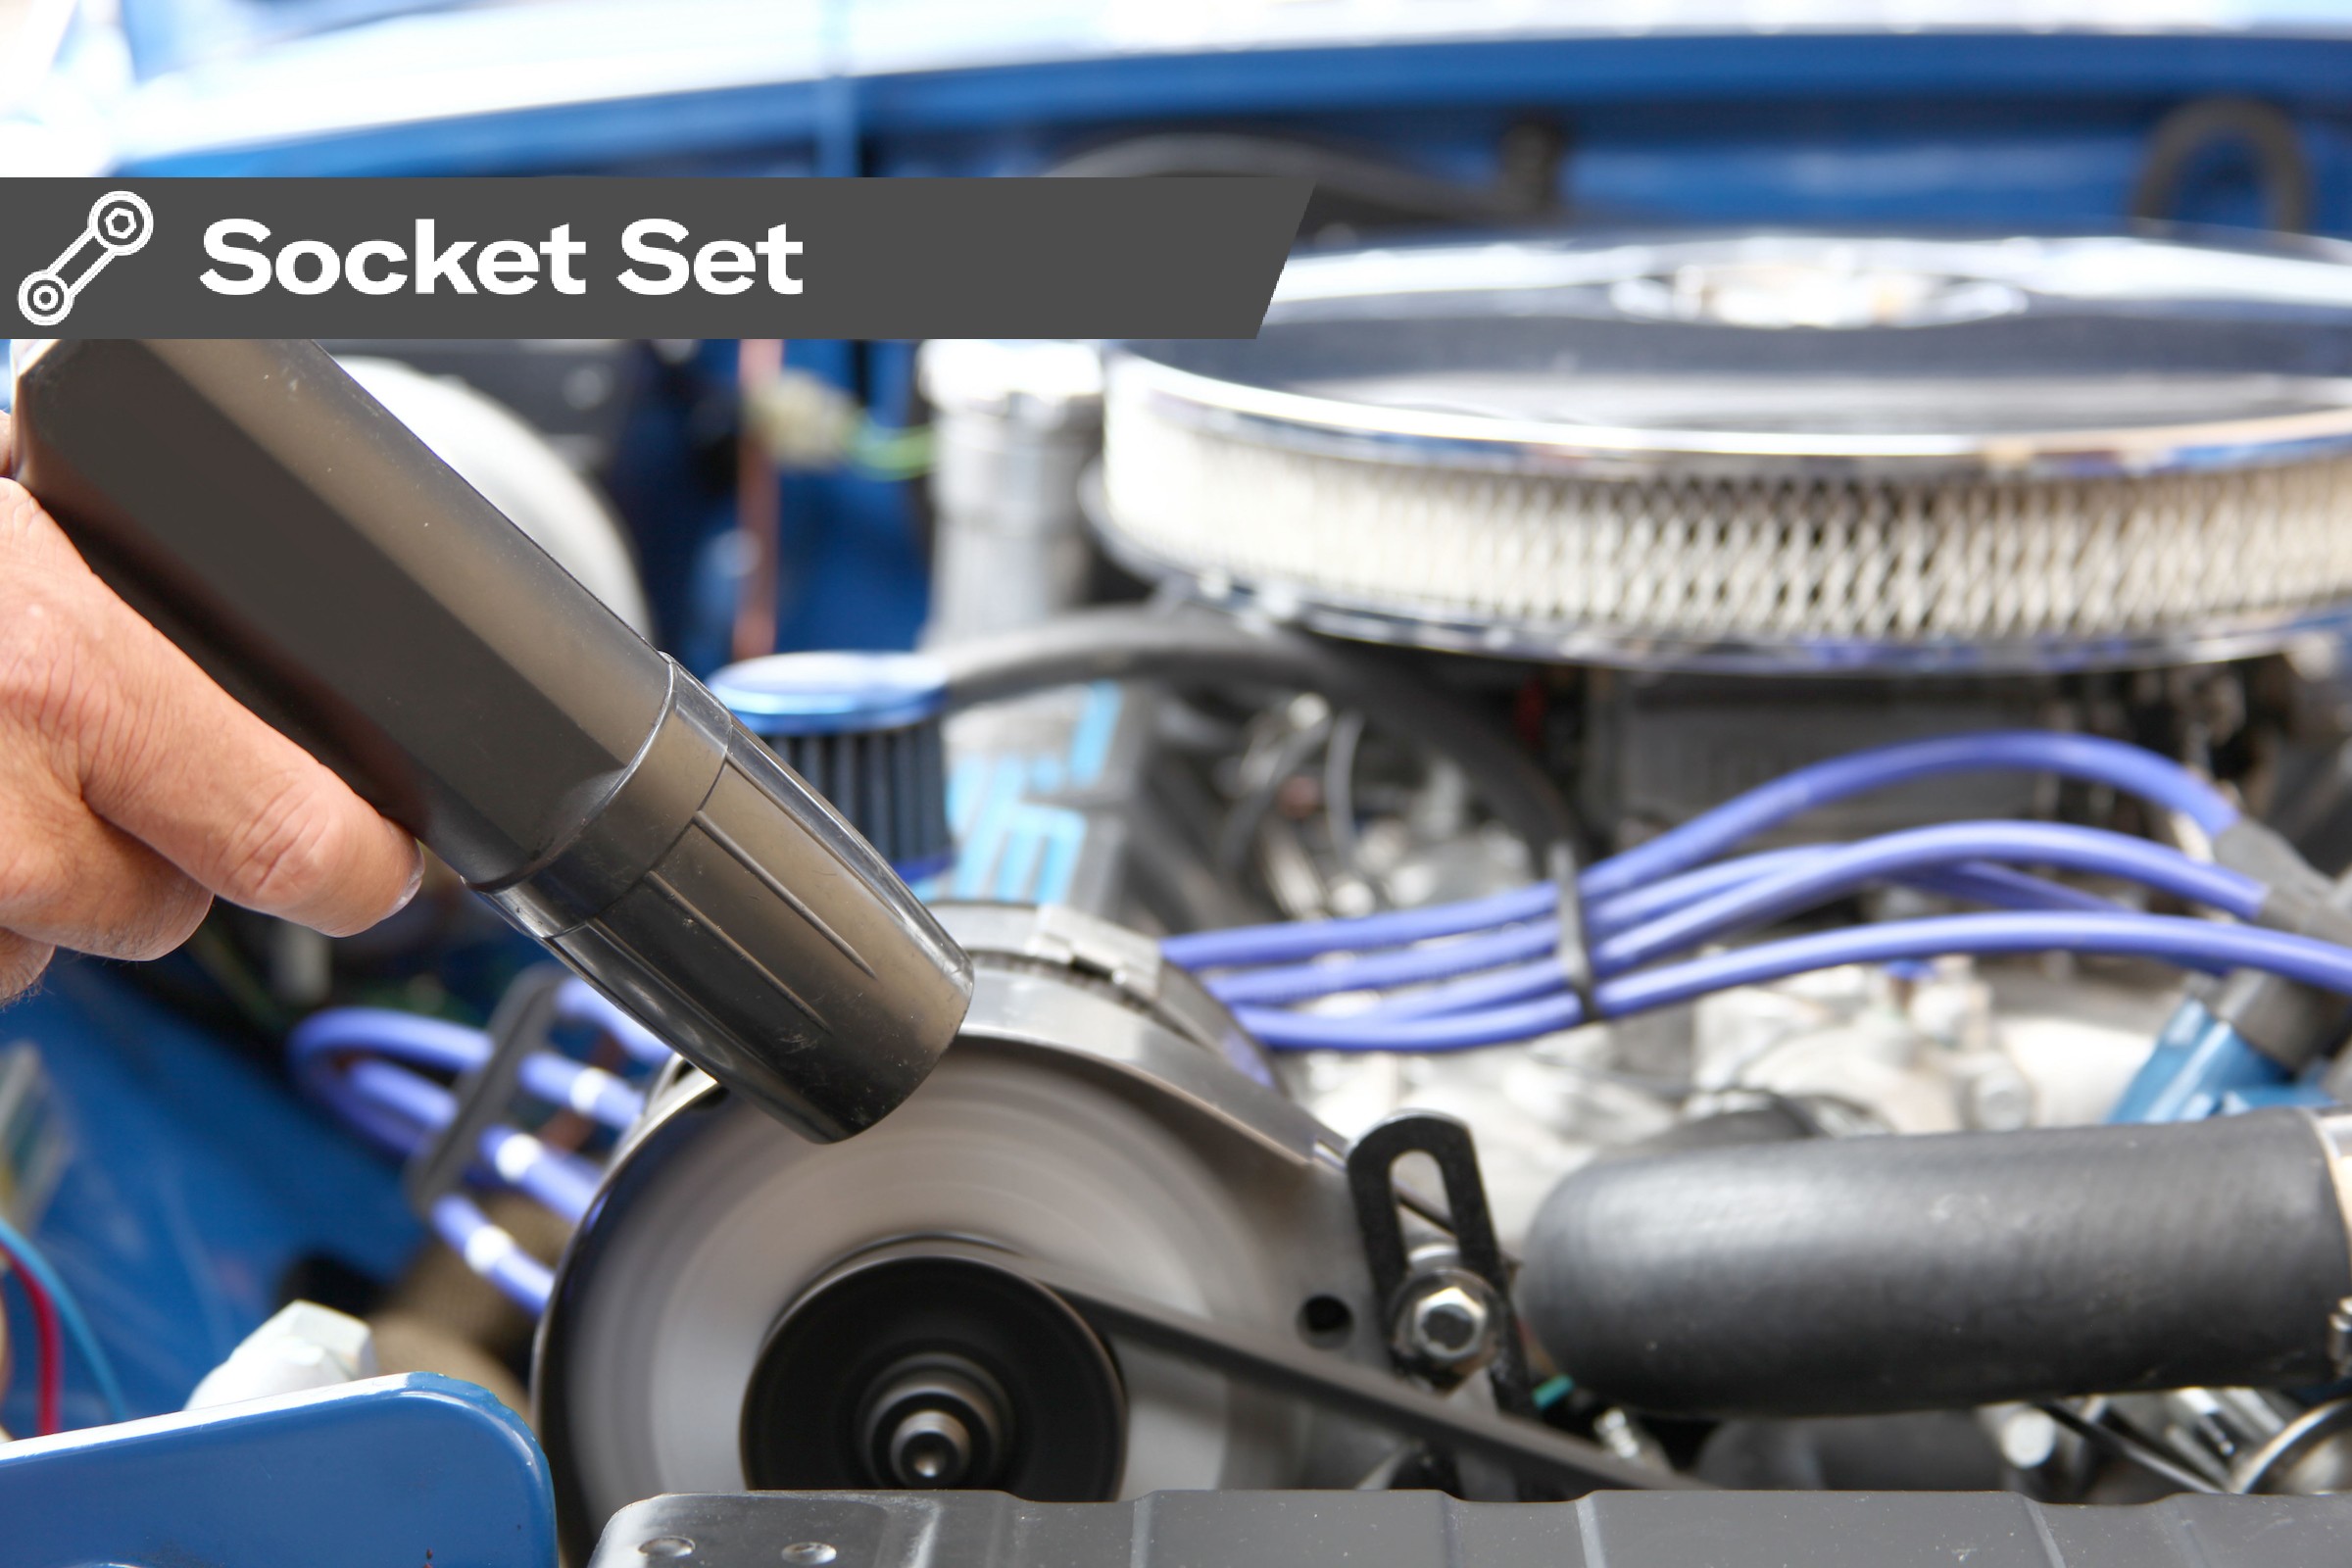 Socket Set: About time you checked your engine’s timing?